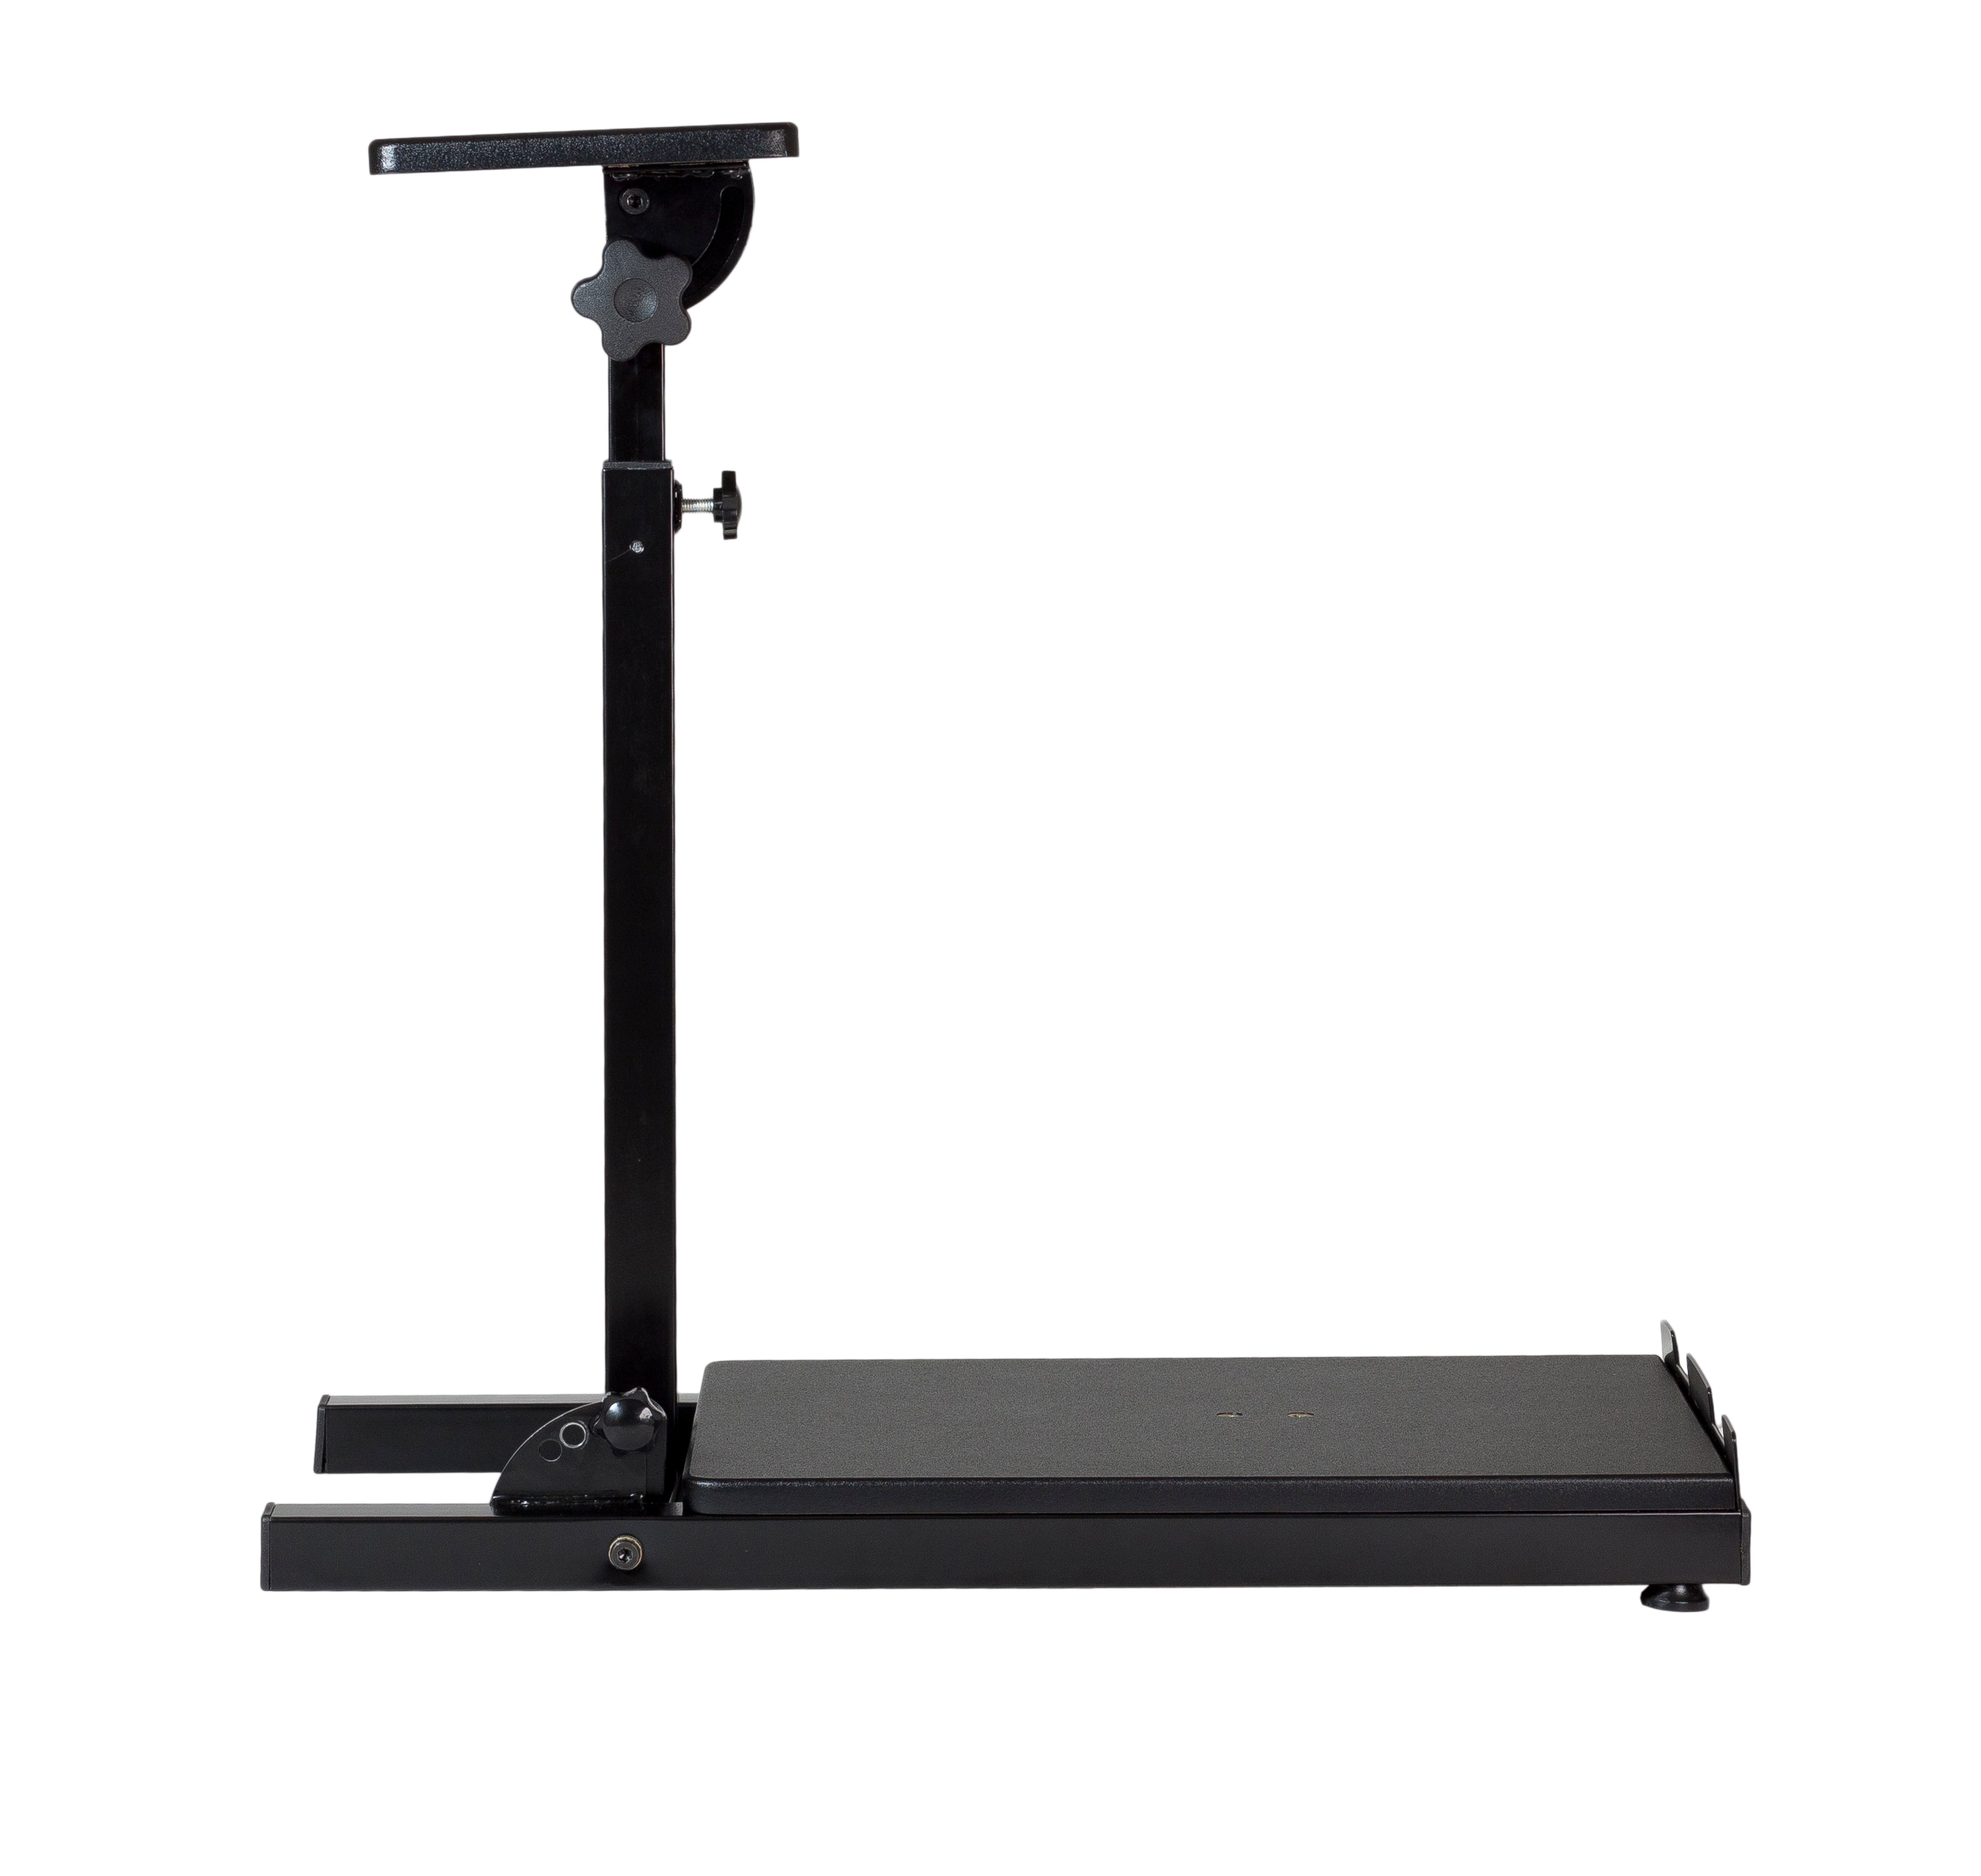 The Ultimate Steering Wheel Stand - 25% off